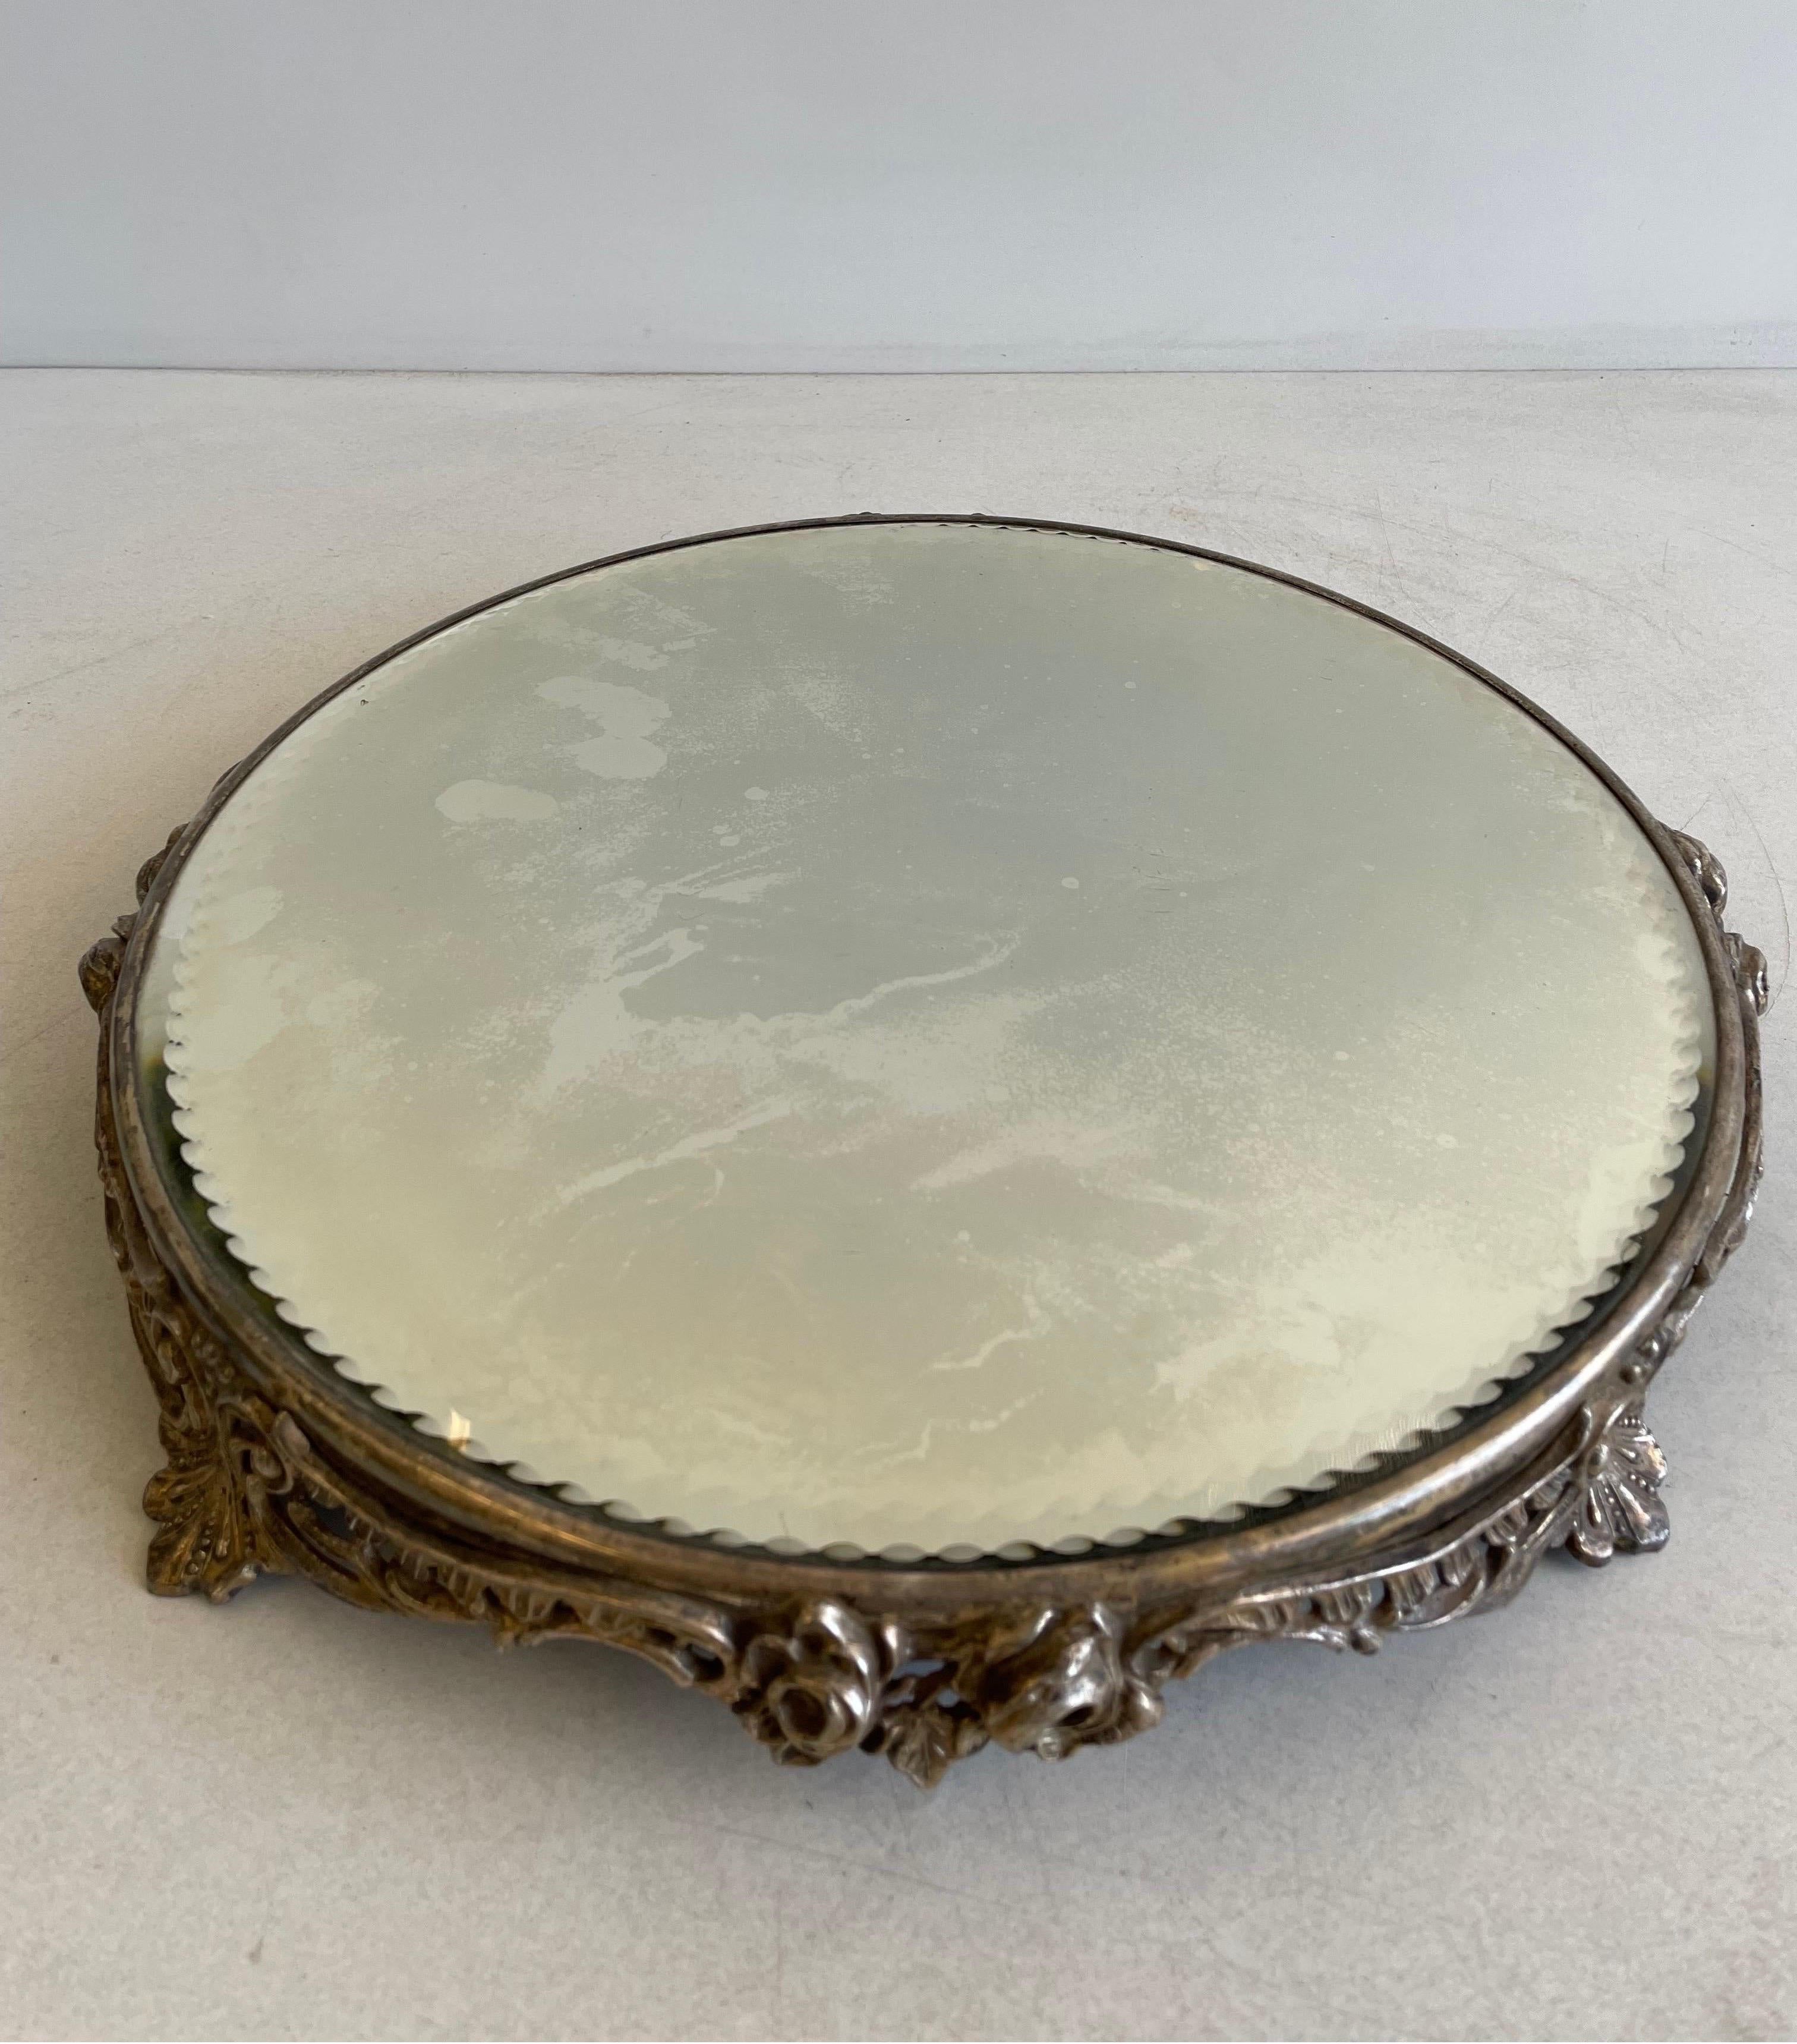 Antique plateau beveled glass mirror with a very ornate metal base! The mirror with some minor silver loss.. Not showing up in the picture are many short, light surface scratches. No chips, cracks or flakes on the nicely beveled mirror. The metal